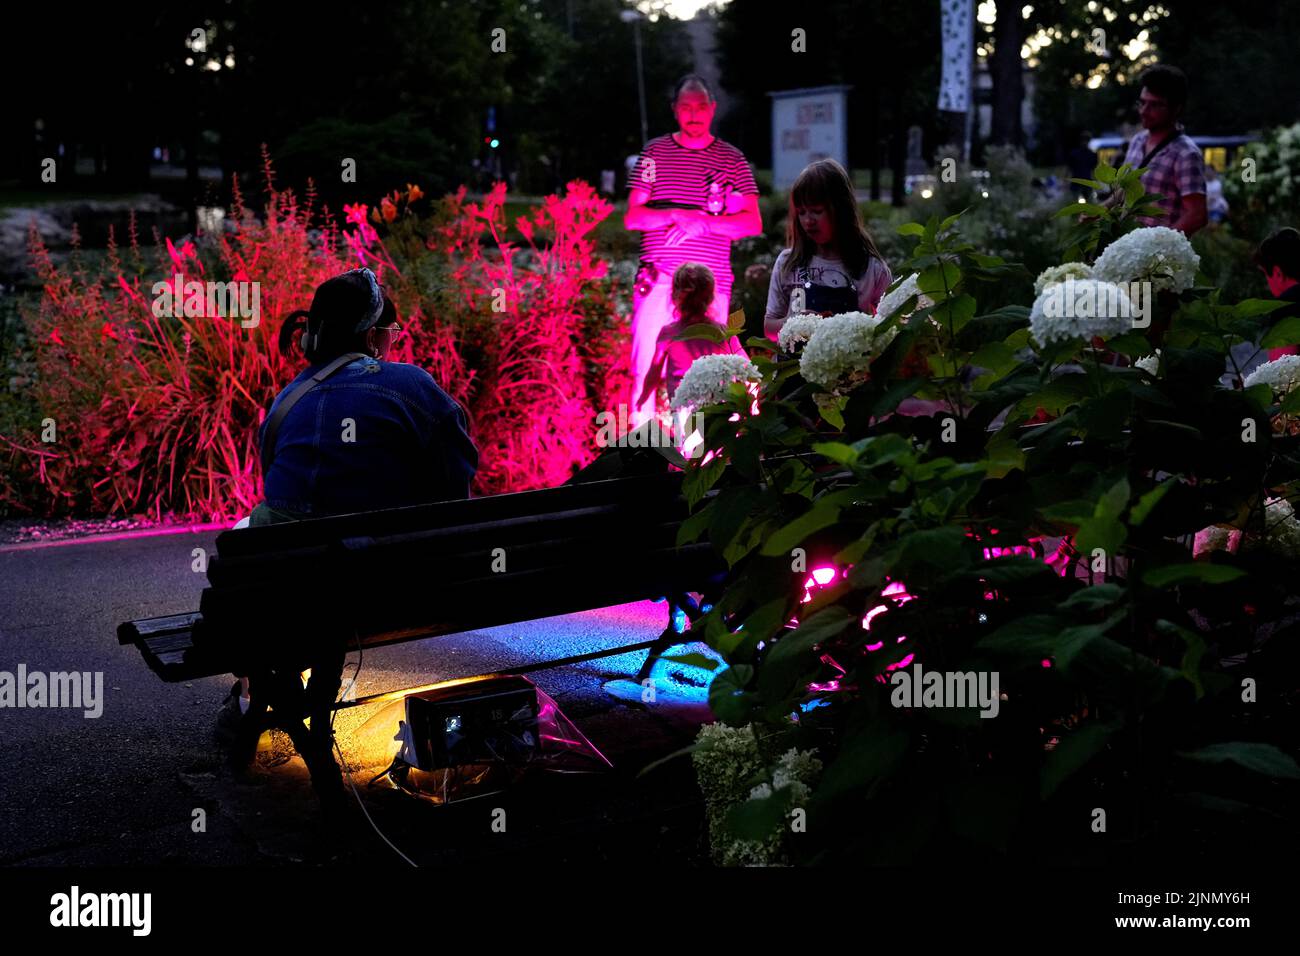 People sit on a colourfully lit bench during the 'Night in the park' event in Riga, Latvia August 12, 2022. REUTERS/Ints Kalnins Stock Photo